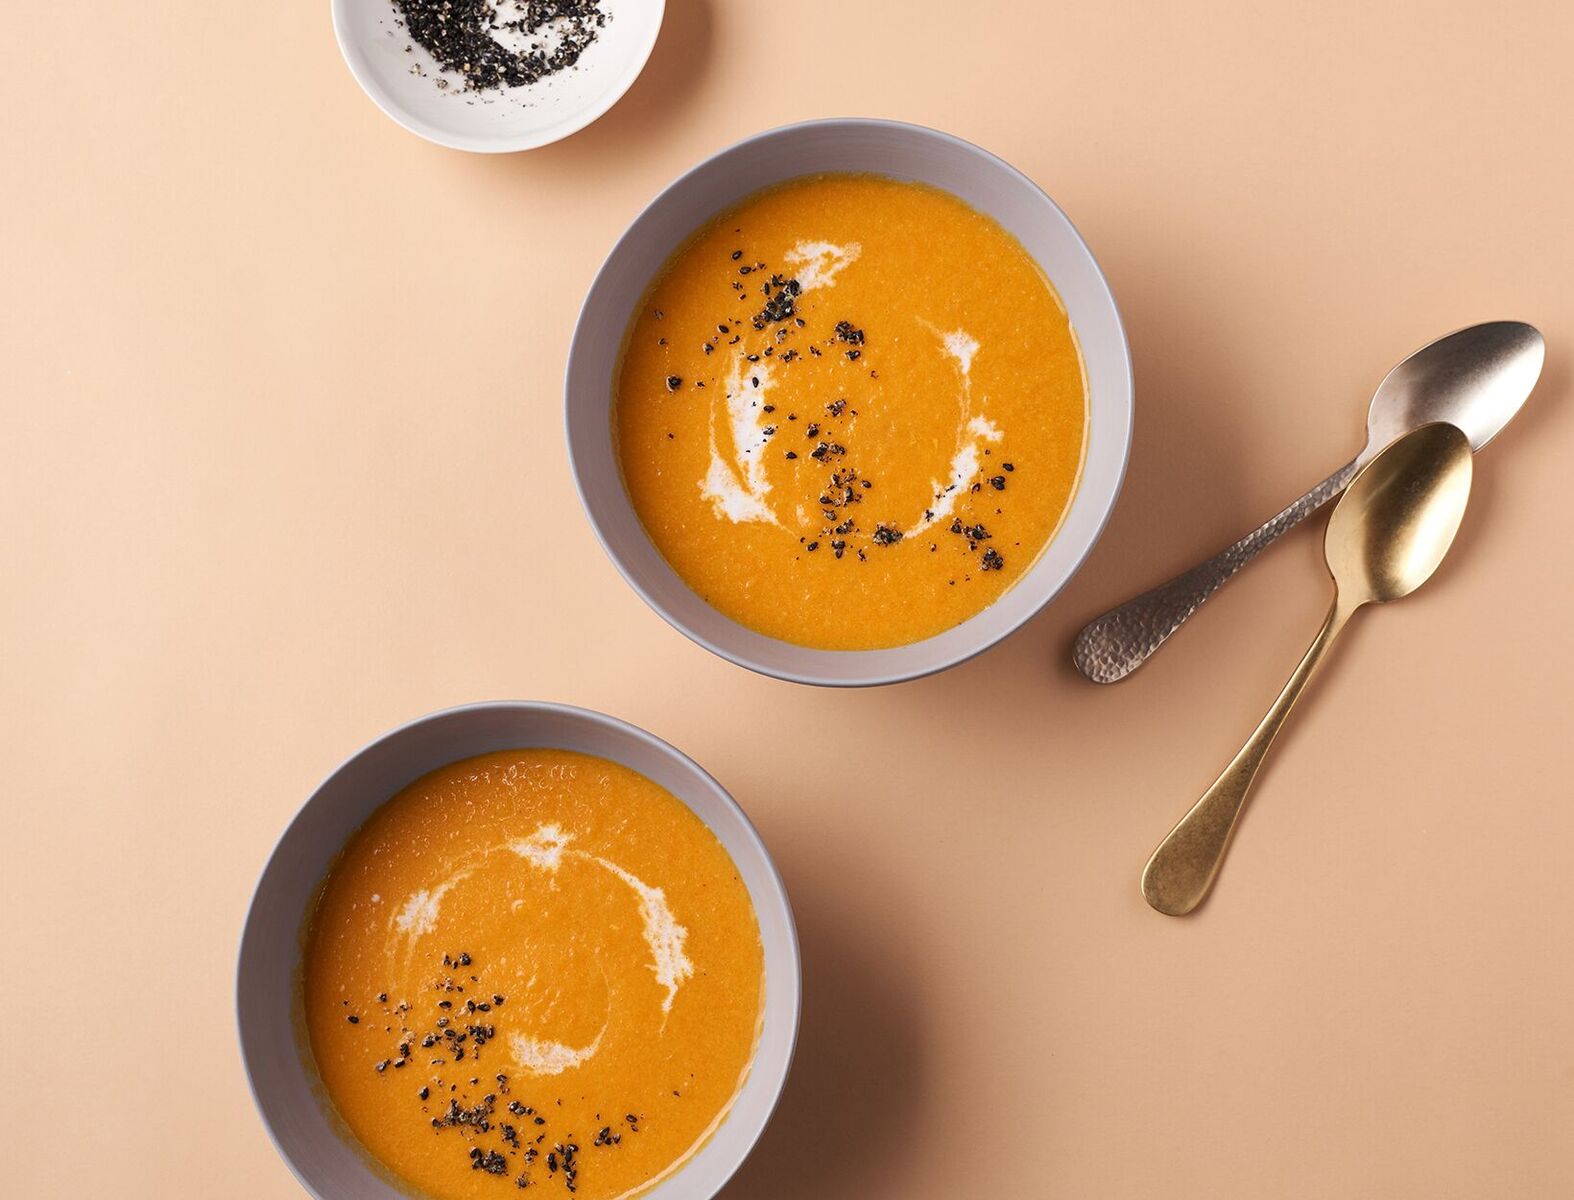 Probiotic Miso Ginger Carrot Soup with Black Sesame Dust